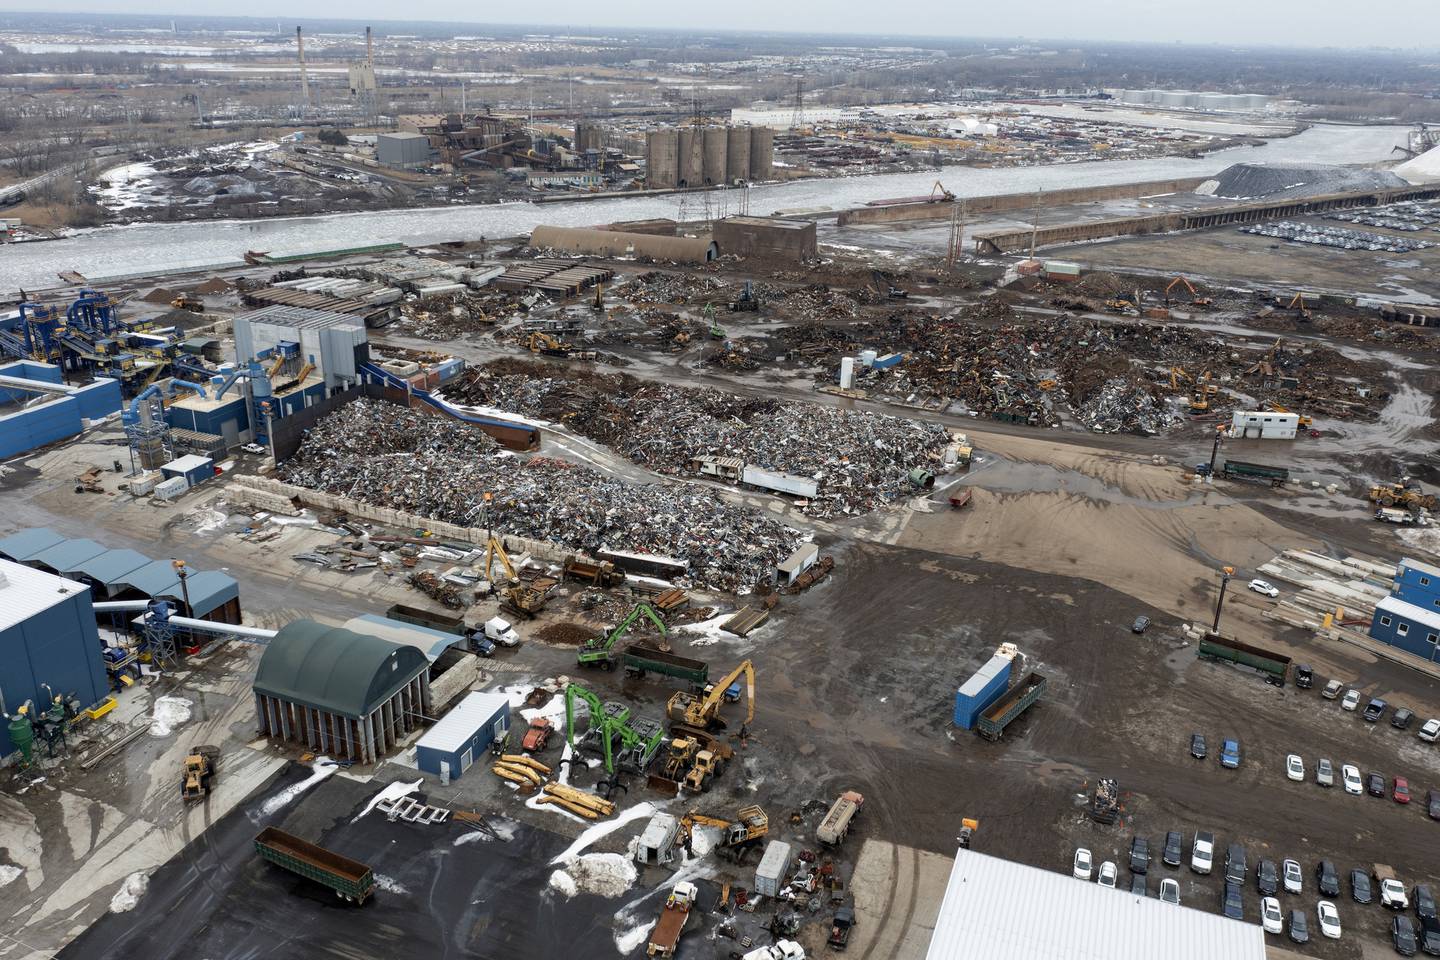 Reserve Management Group facilities can be seen on Feb. 16, 2022, in the East Side neighborhood of Chicago. General Iron, a chronic polluter and scrap shredder that closed its Lincoln Park facilities on the North Side, planned to move operations to a site on the Calumet River in the East Side neighborhood. 